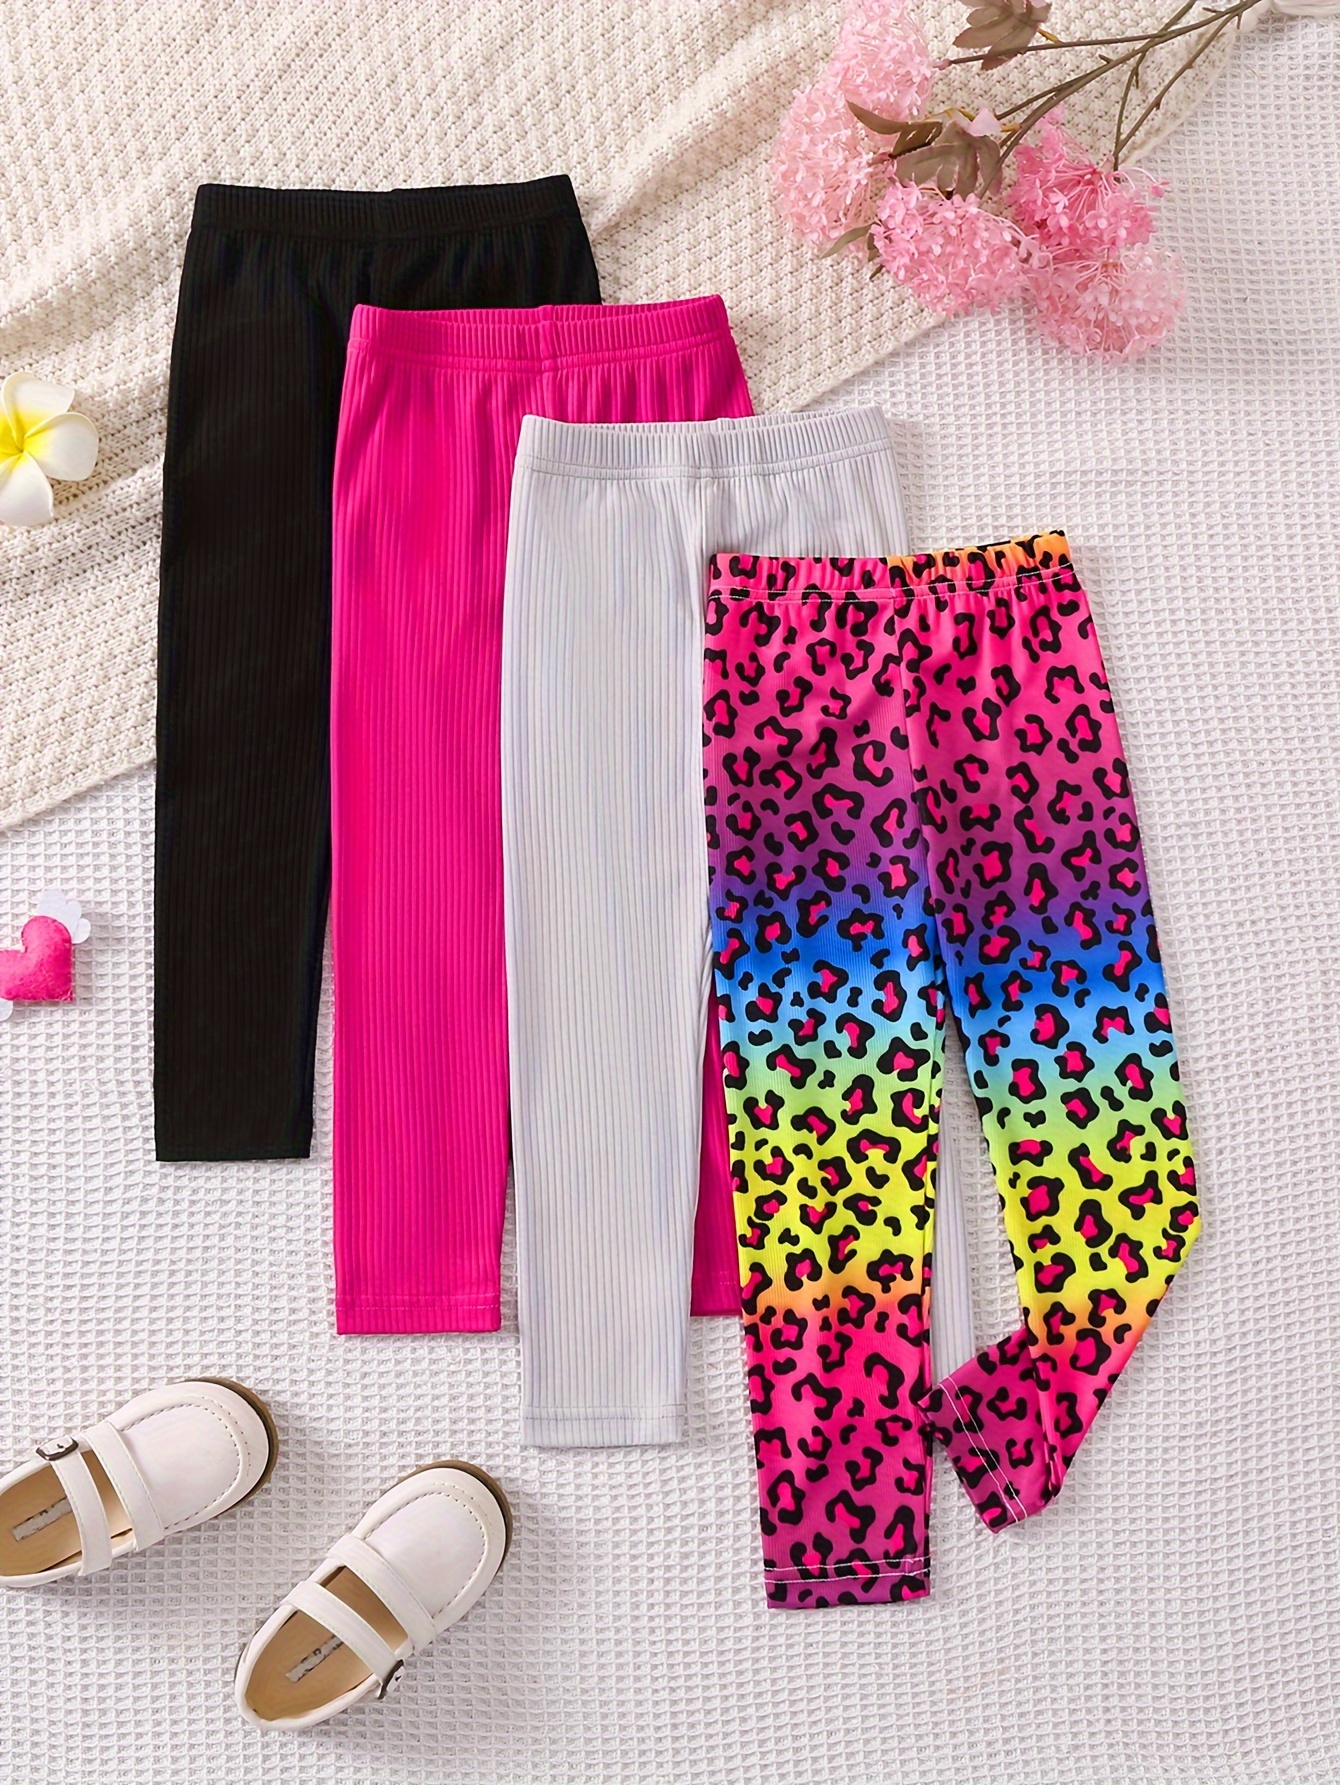 Multipack - Young Girls Fashion Leopard & Solid Basic Legging Pants,  Elastic & Comfortable Trousers Set